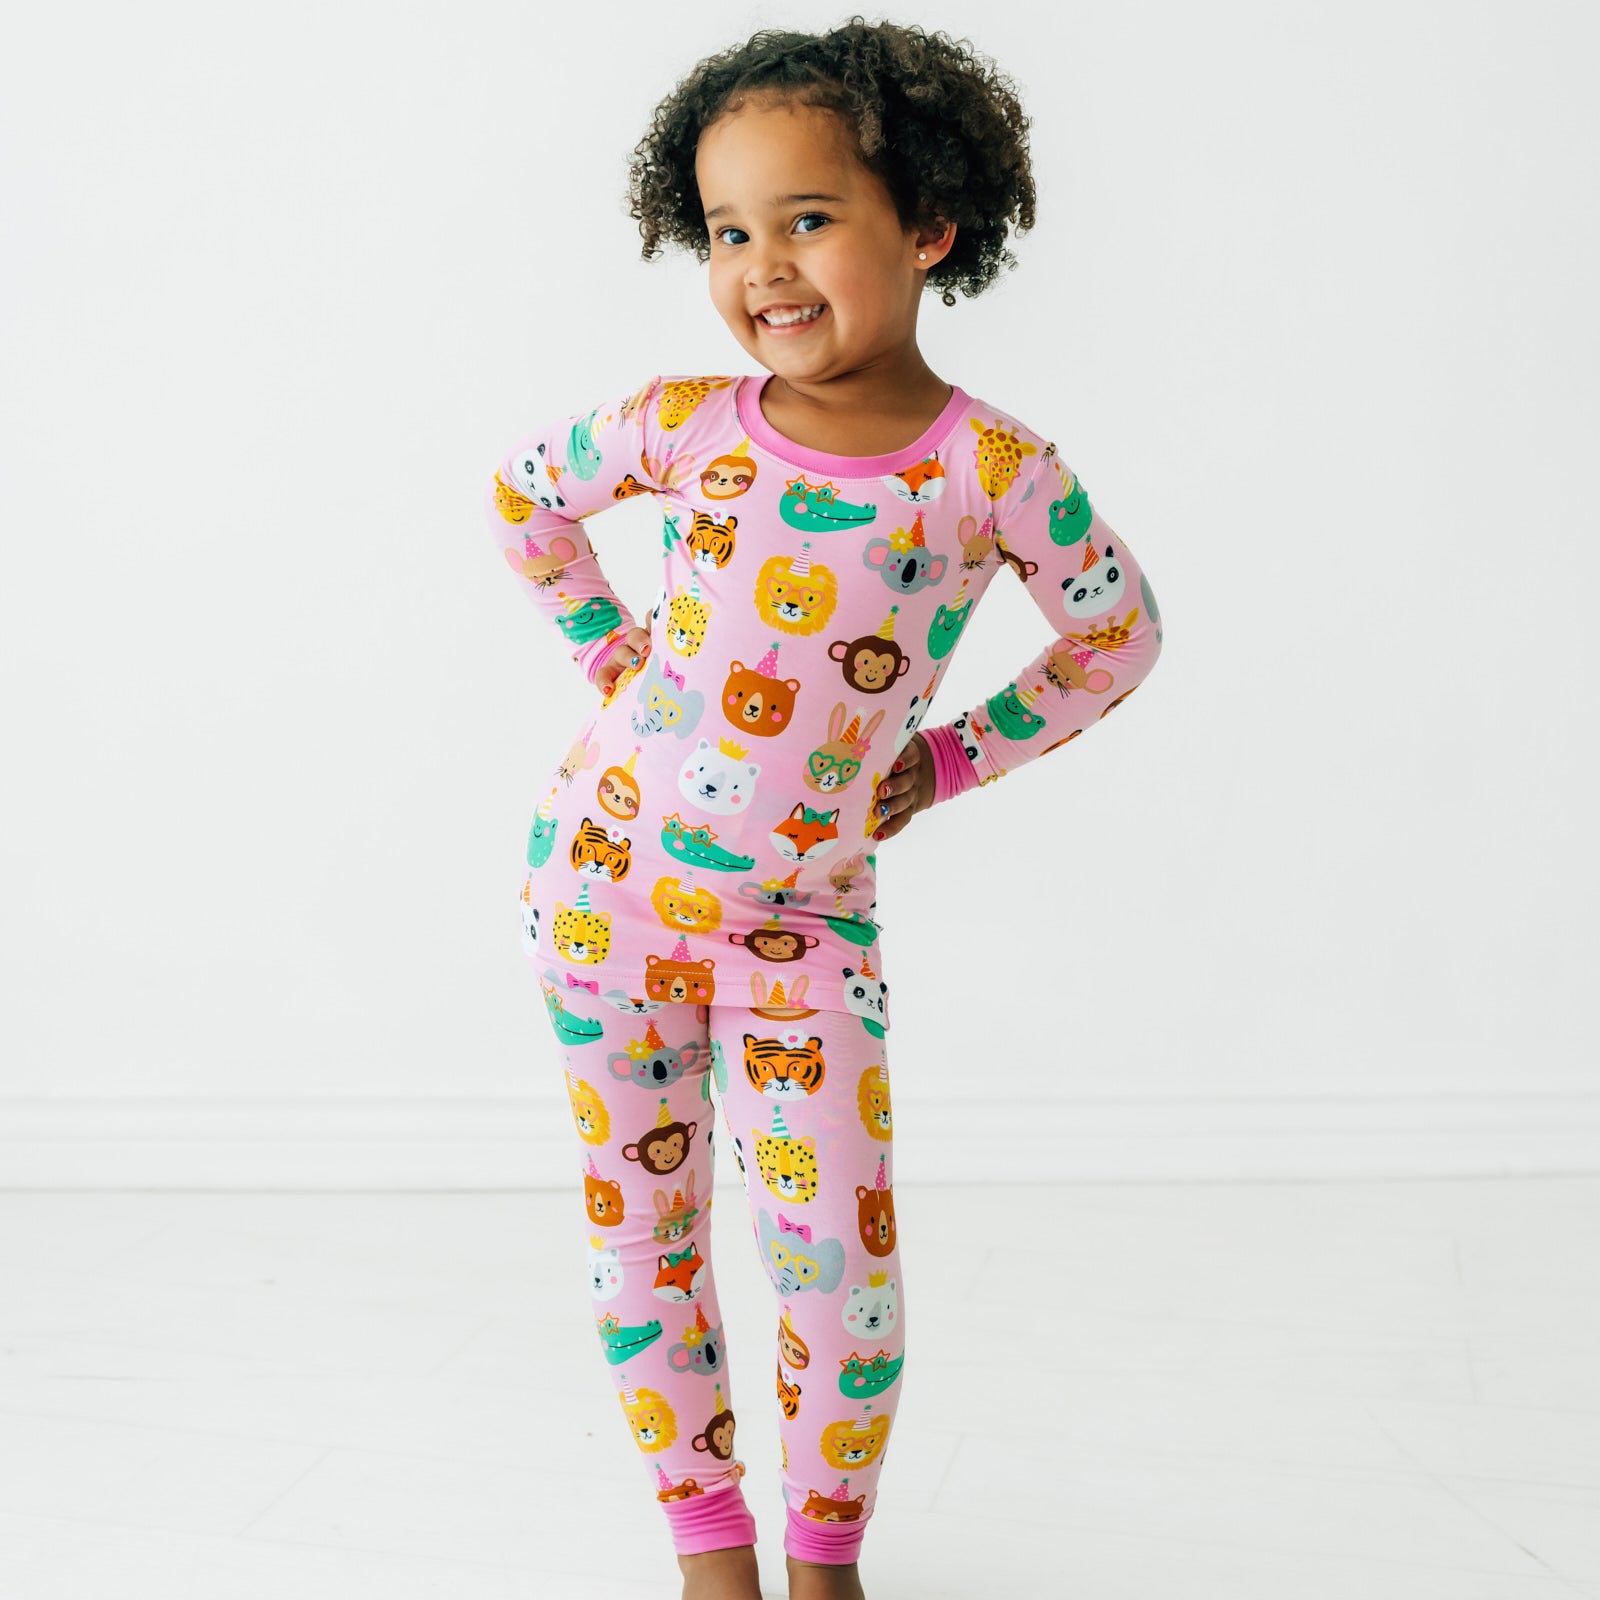 Child posing wearing a Pink Party Pals two piece pj set